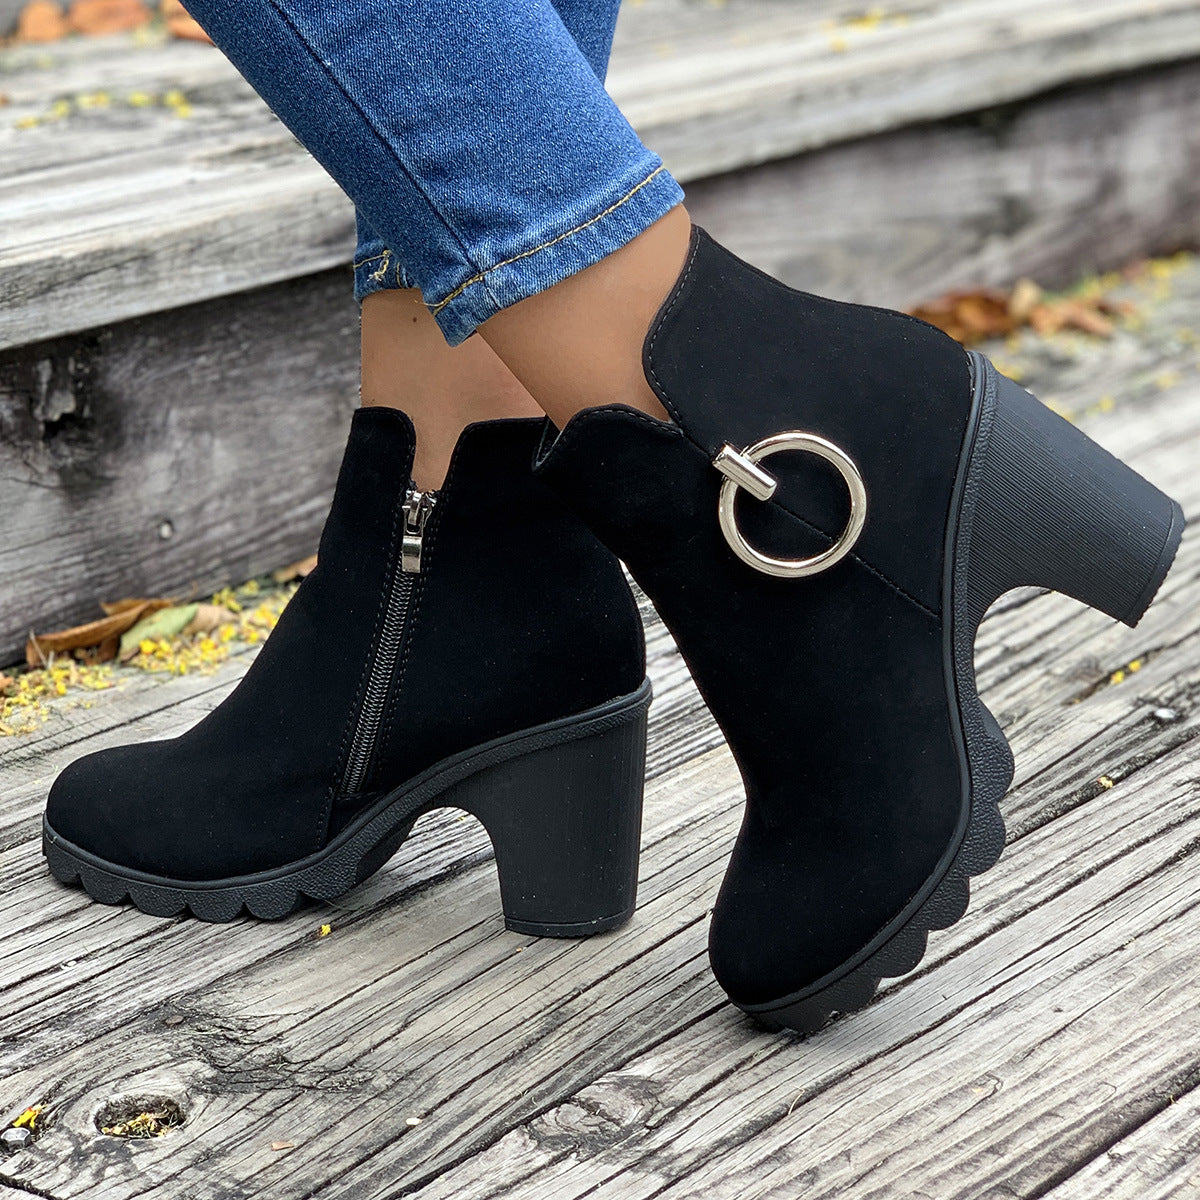 Chunky Heel Plus Size Side Zipper Round Head Ankle Boots High Heel Martin Boots